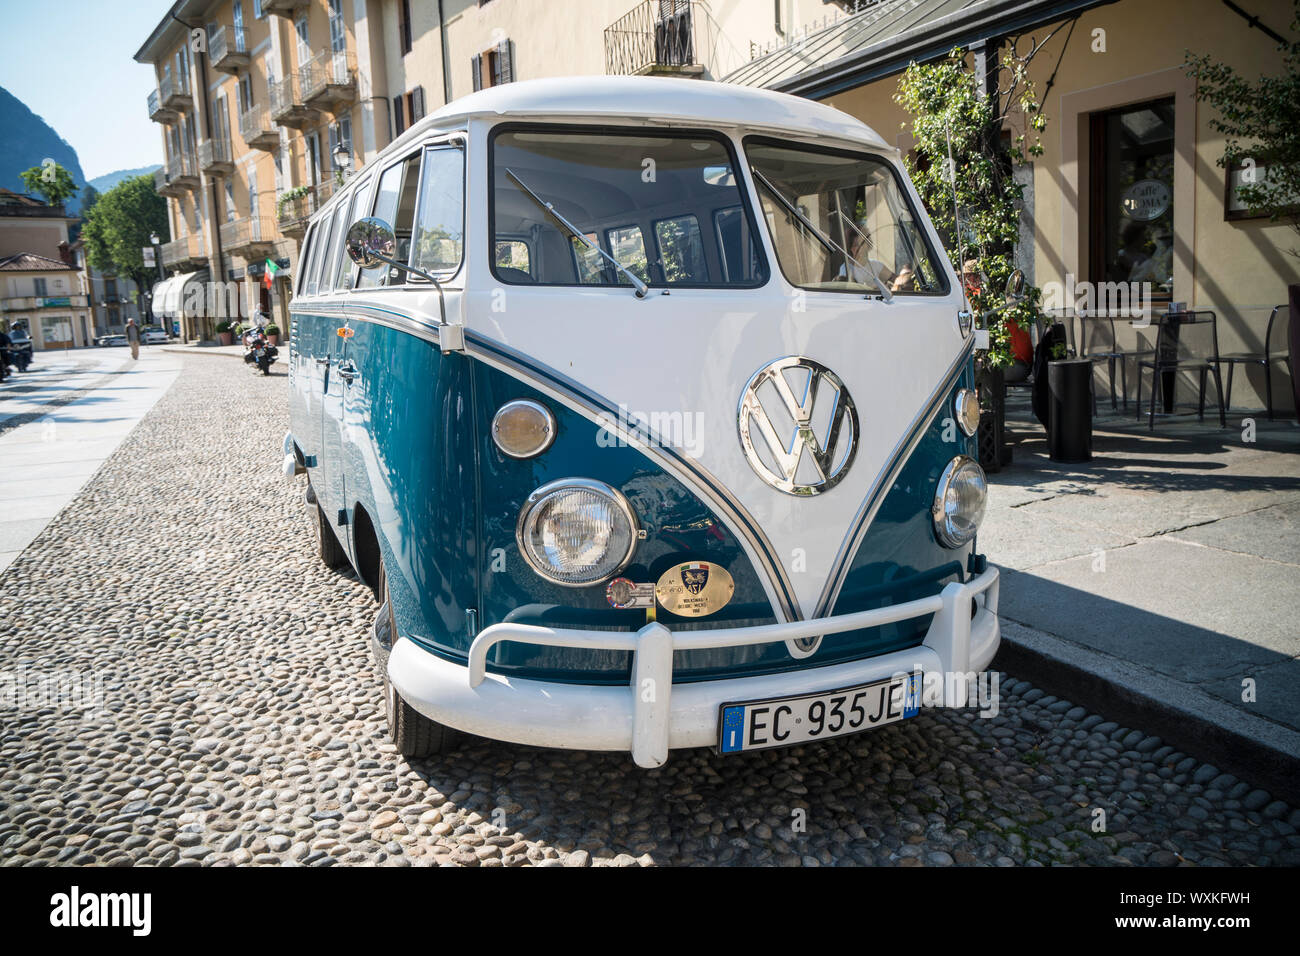 Varallo Sesia, Italy - June 02, 2019: Classic car, old German van Volkswagen Transporter during a vintage cars rally Stock Photo